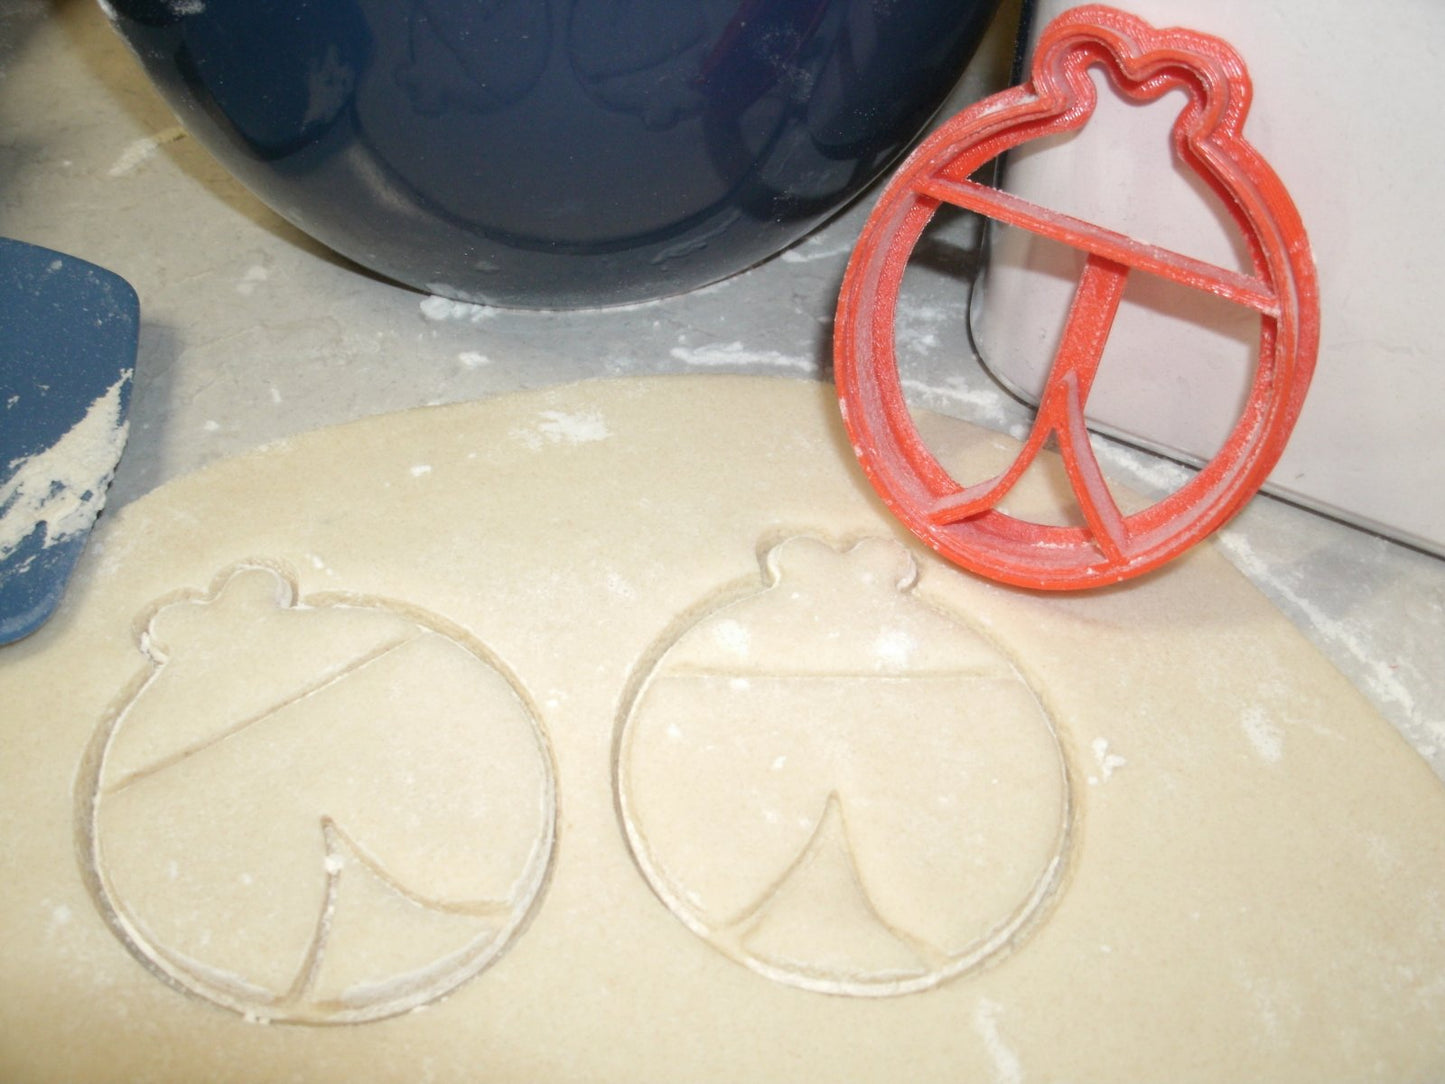 Ladybug Ladybird Beetle Special Occasion Cookie Cutter USA PR632